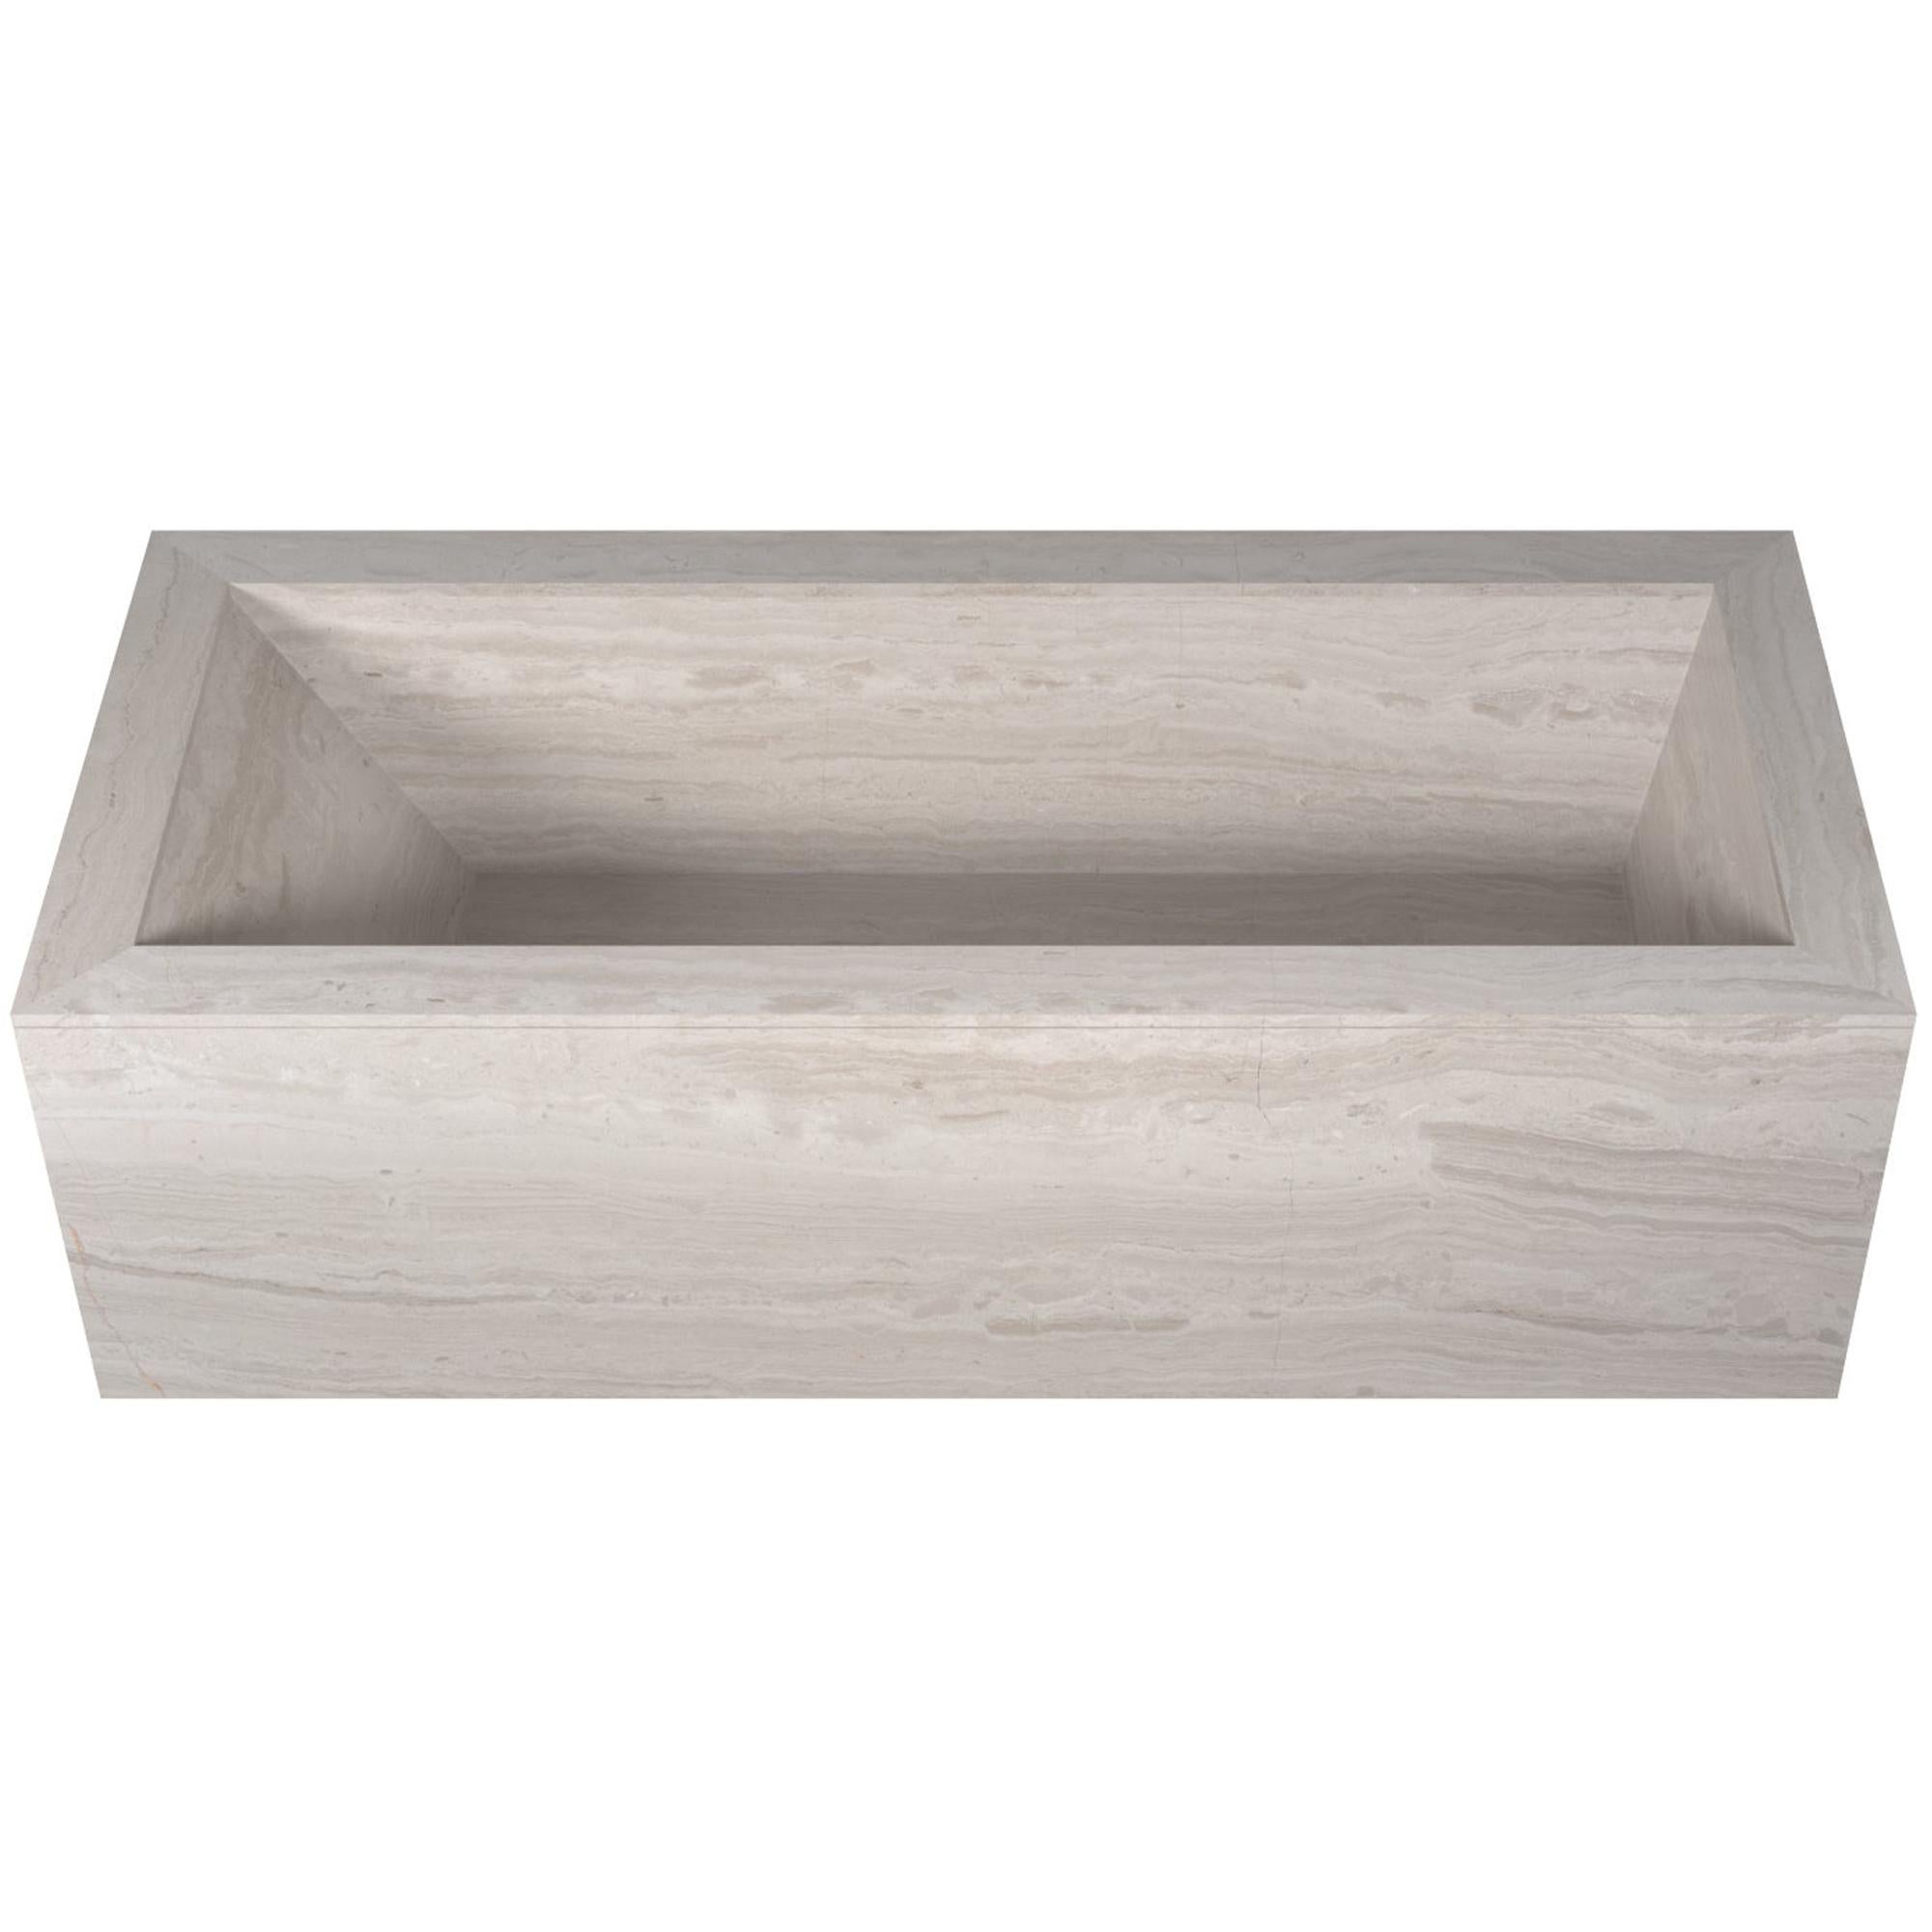 Salvatori Oyster Bathtub in Silk Georgette Stone with Honed Texture For Sale